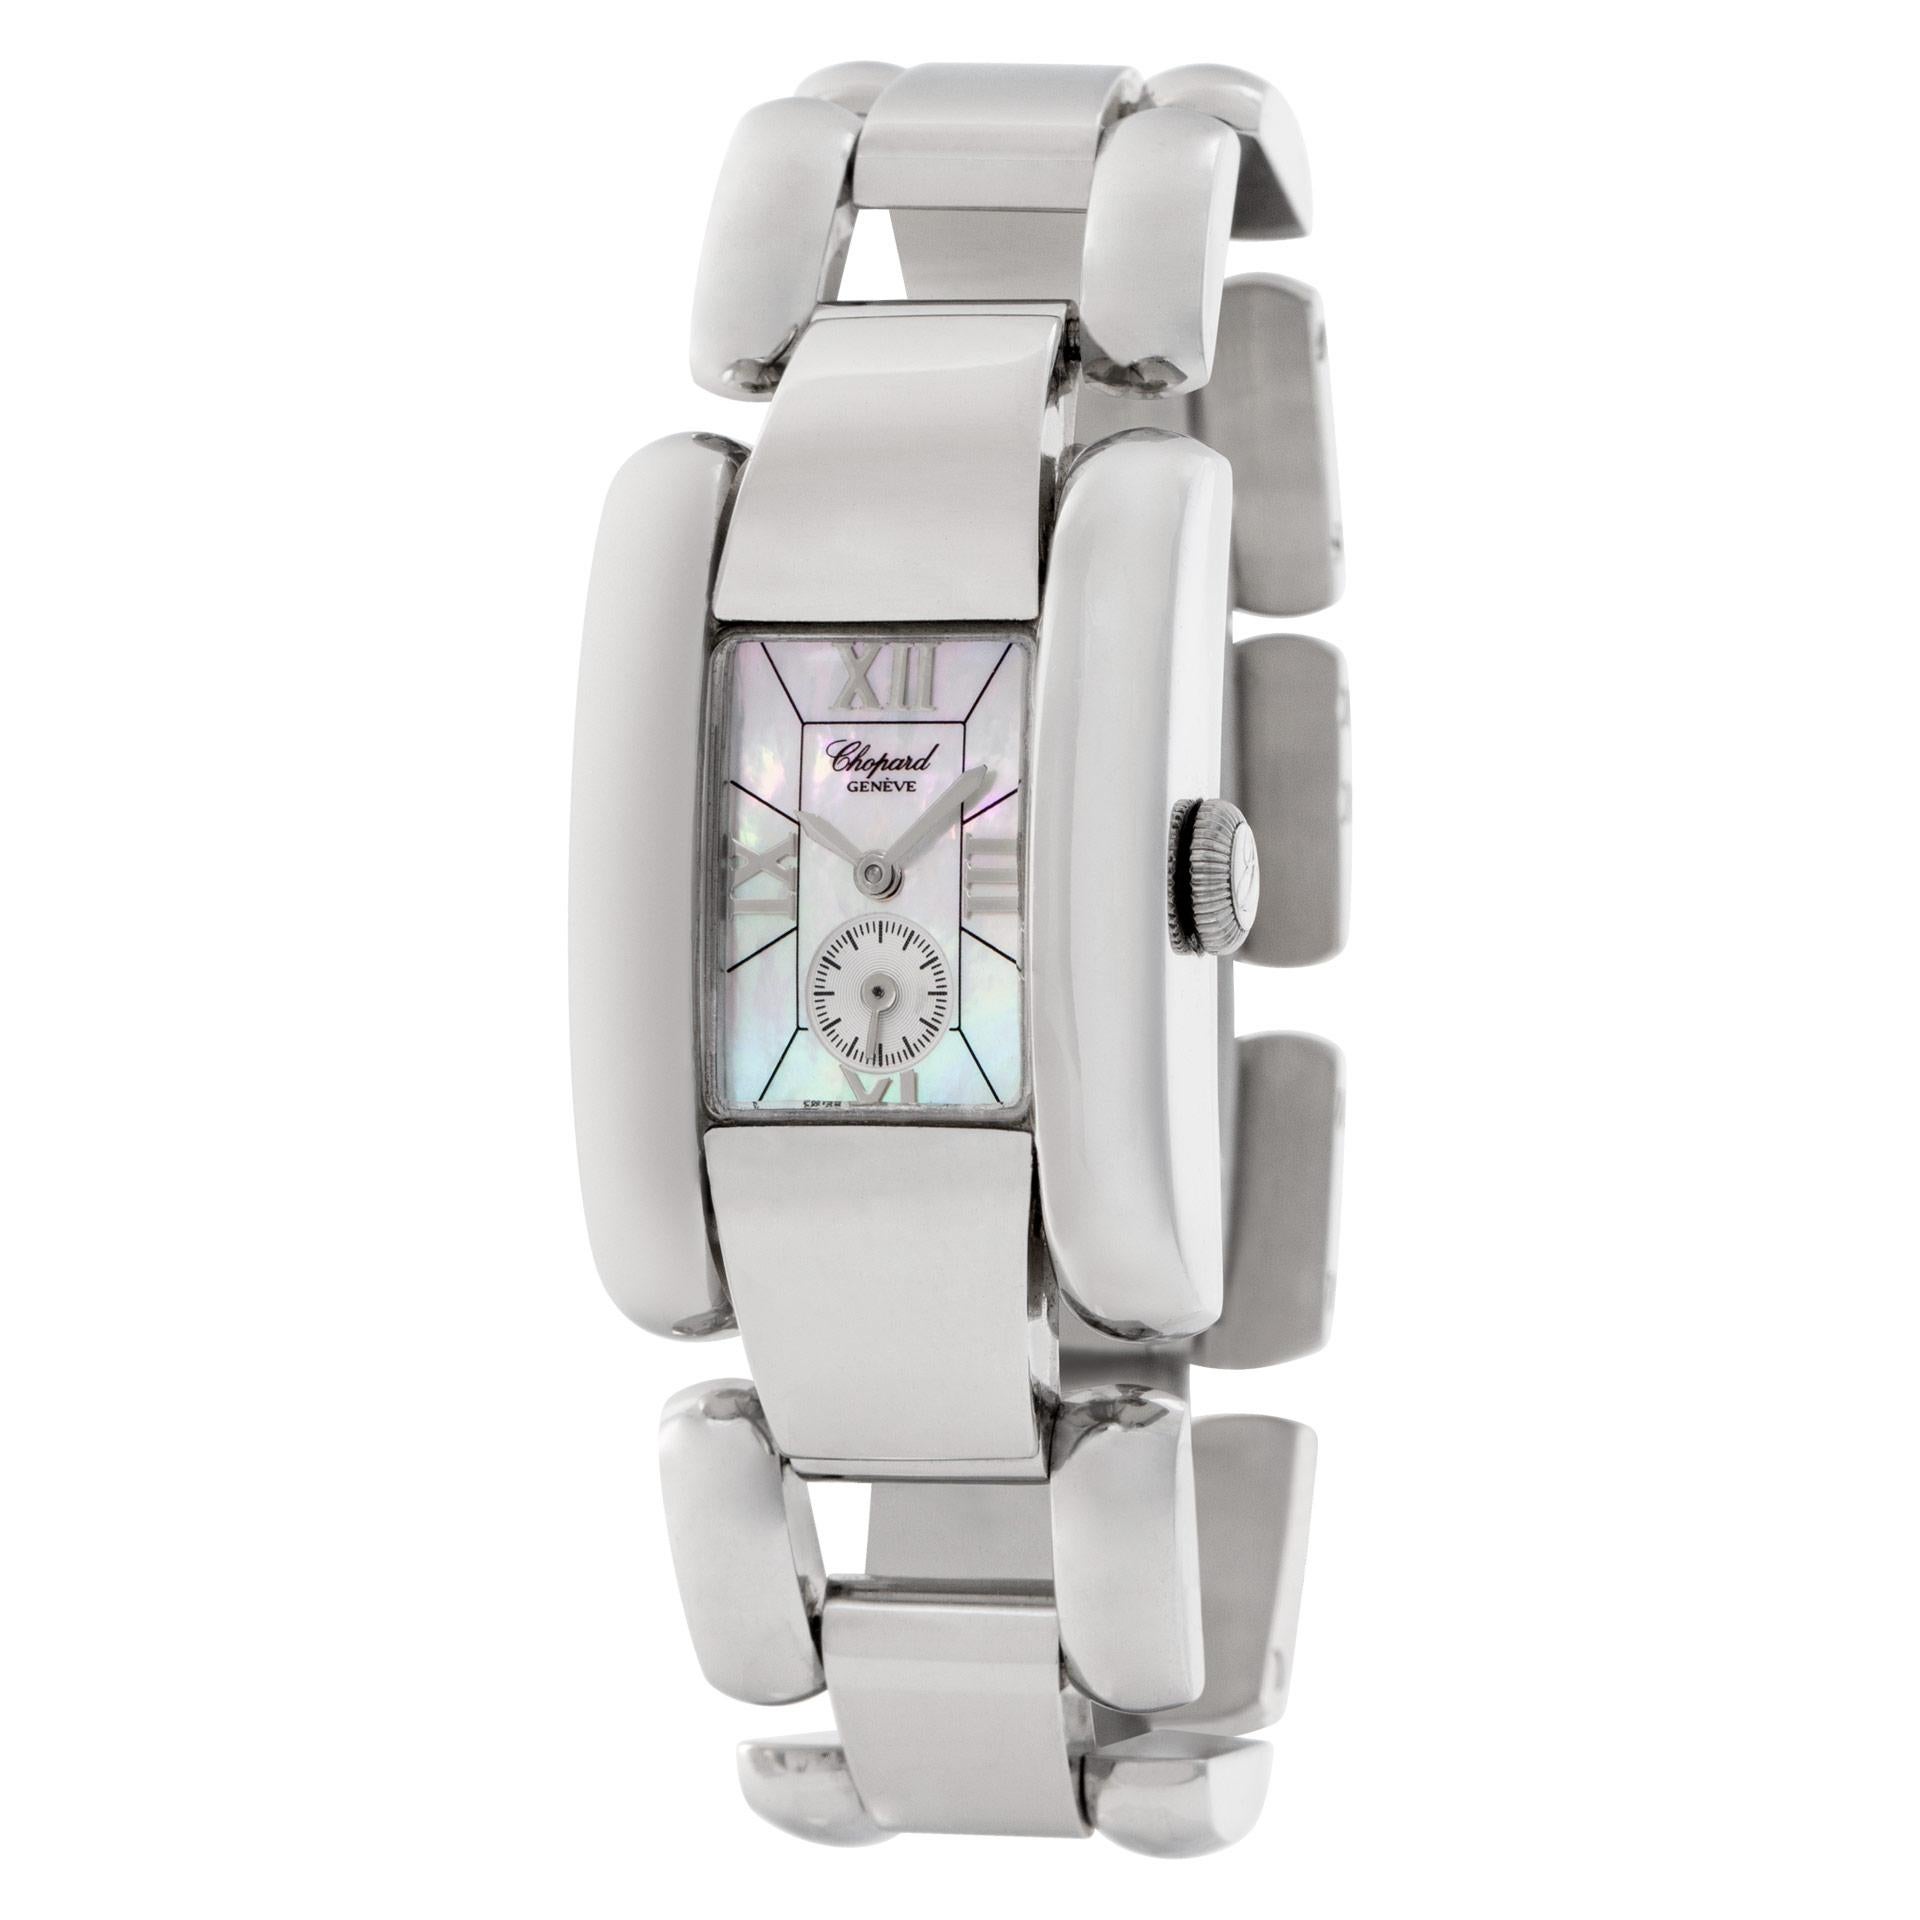 Ladies Chopard La Strada with Mother of Pearl dial in stainless steel. Quartz watch w/ subseconds. With box and papers. Ref 41/8357. Fine Pre-owned Chopard Watch.   Certified preowned Chopard La Strada 41/8357 watch is made out of Stainless steel on